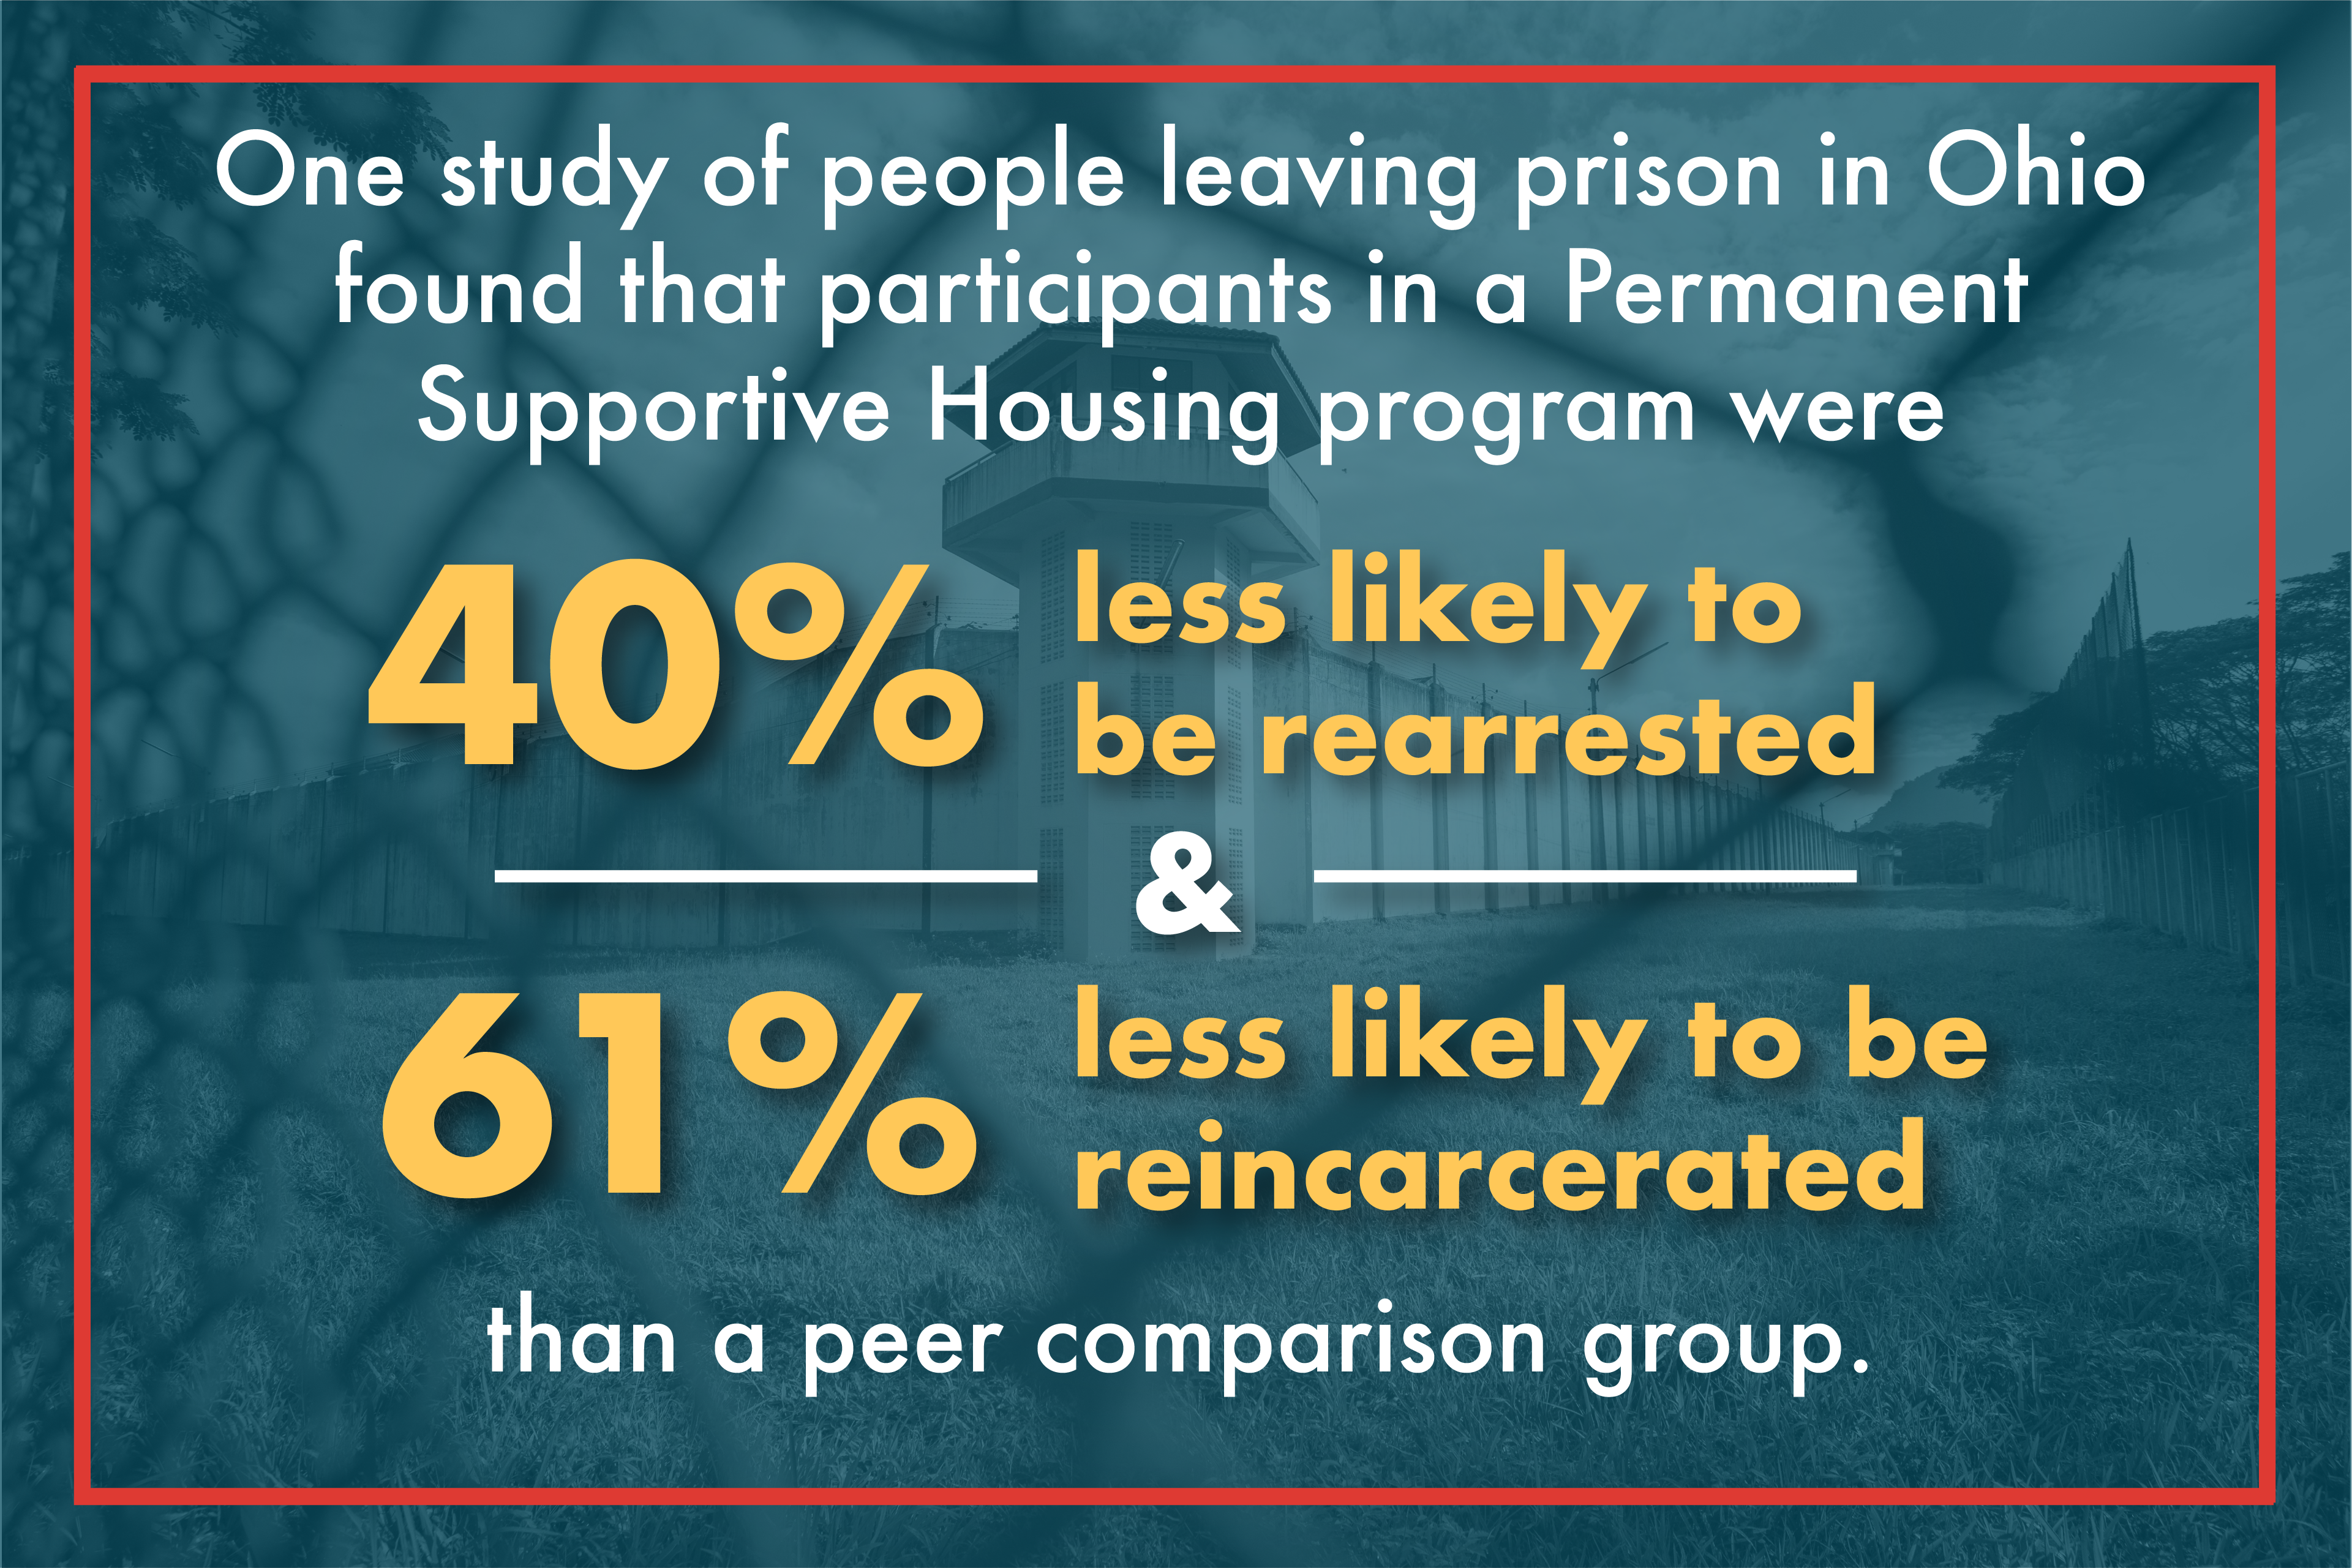 One study of people leaving prison in Ohio found that program participants were 40% less likely to be rearrested and 61% less likely to be reincarcerated than a peer comparison group.